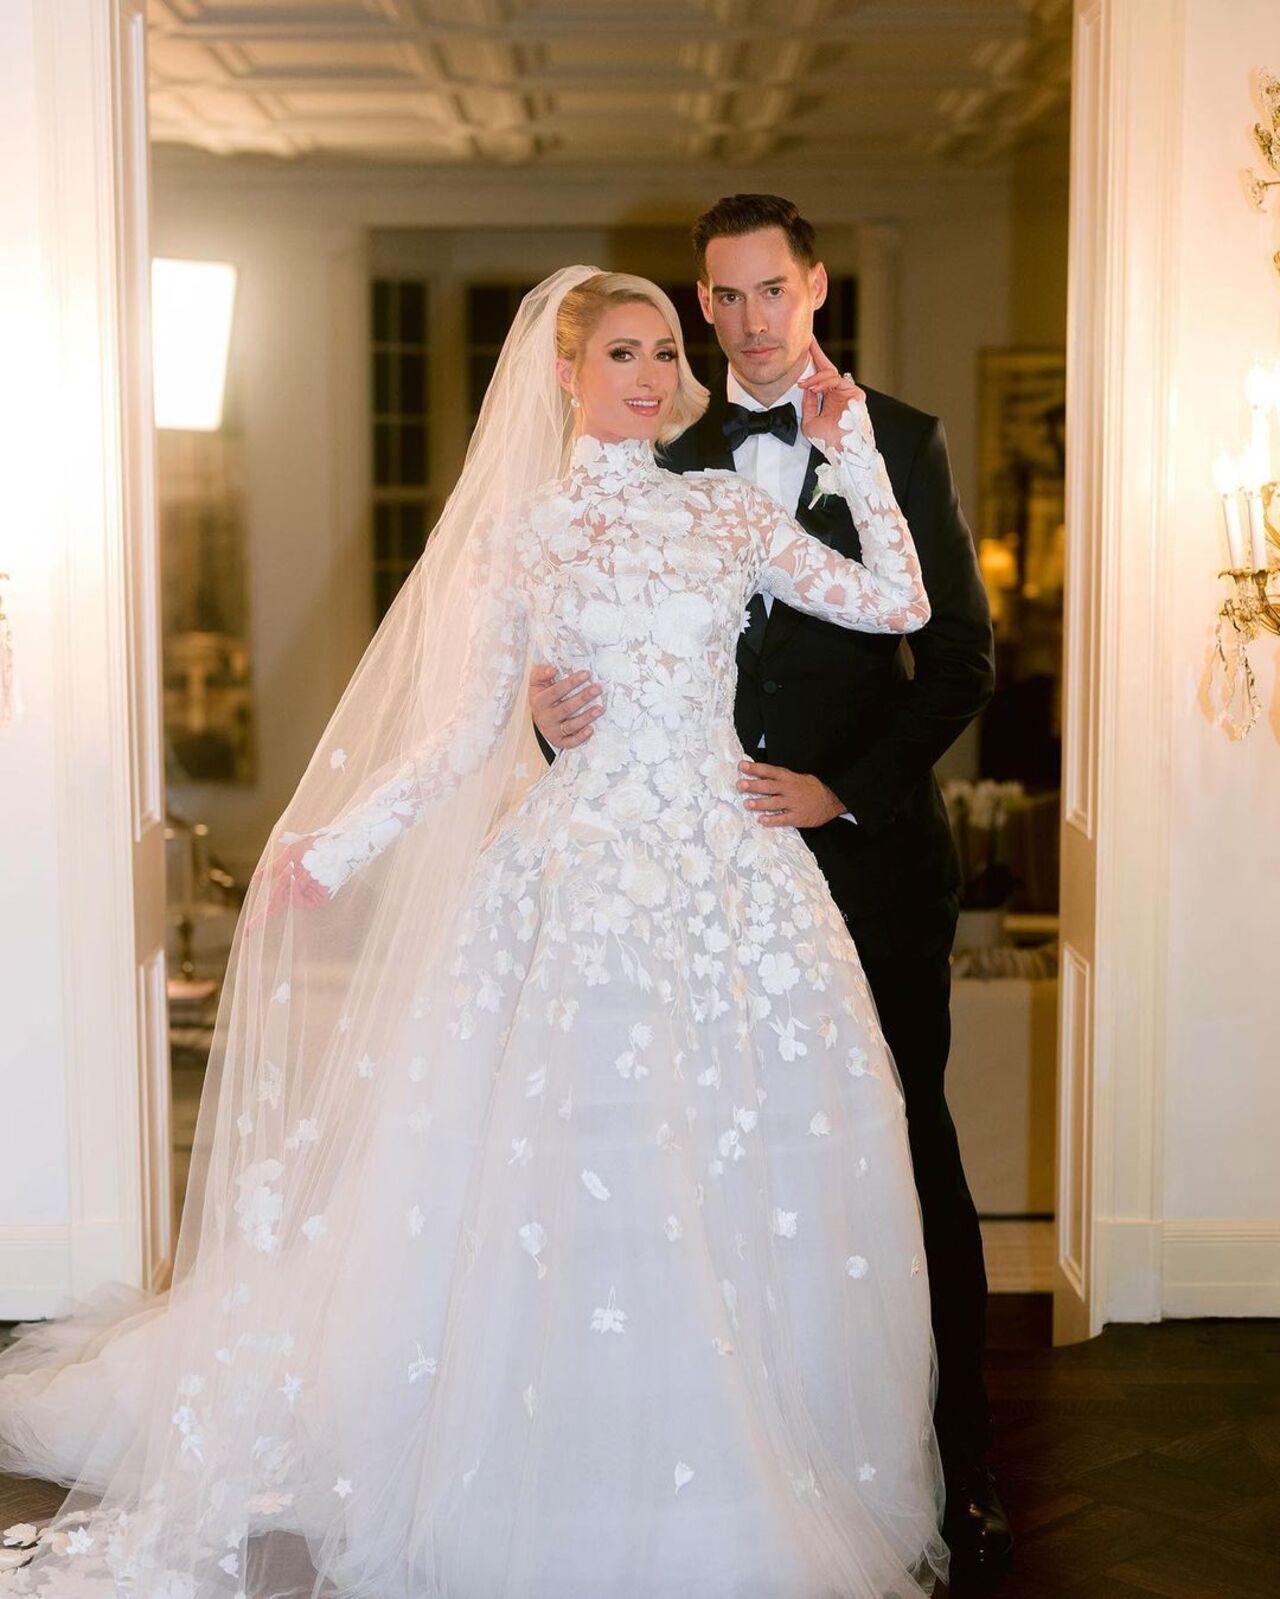 Paris Hilton married Carter Reum in a celeb-studded ceremony at her late grandfather's sprawling Bel-Air estate. For their 'I dos', Paris wore the glamorous custom Oscar de la Renta gown featuring long sleeves covered in floral embroidery with a matching veil.